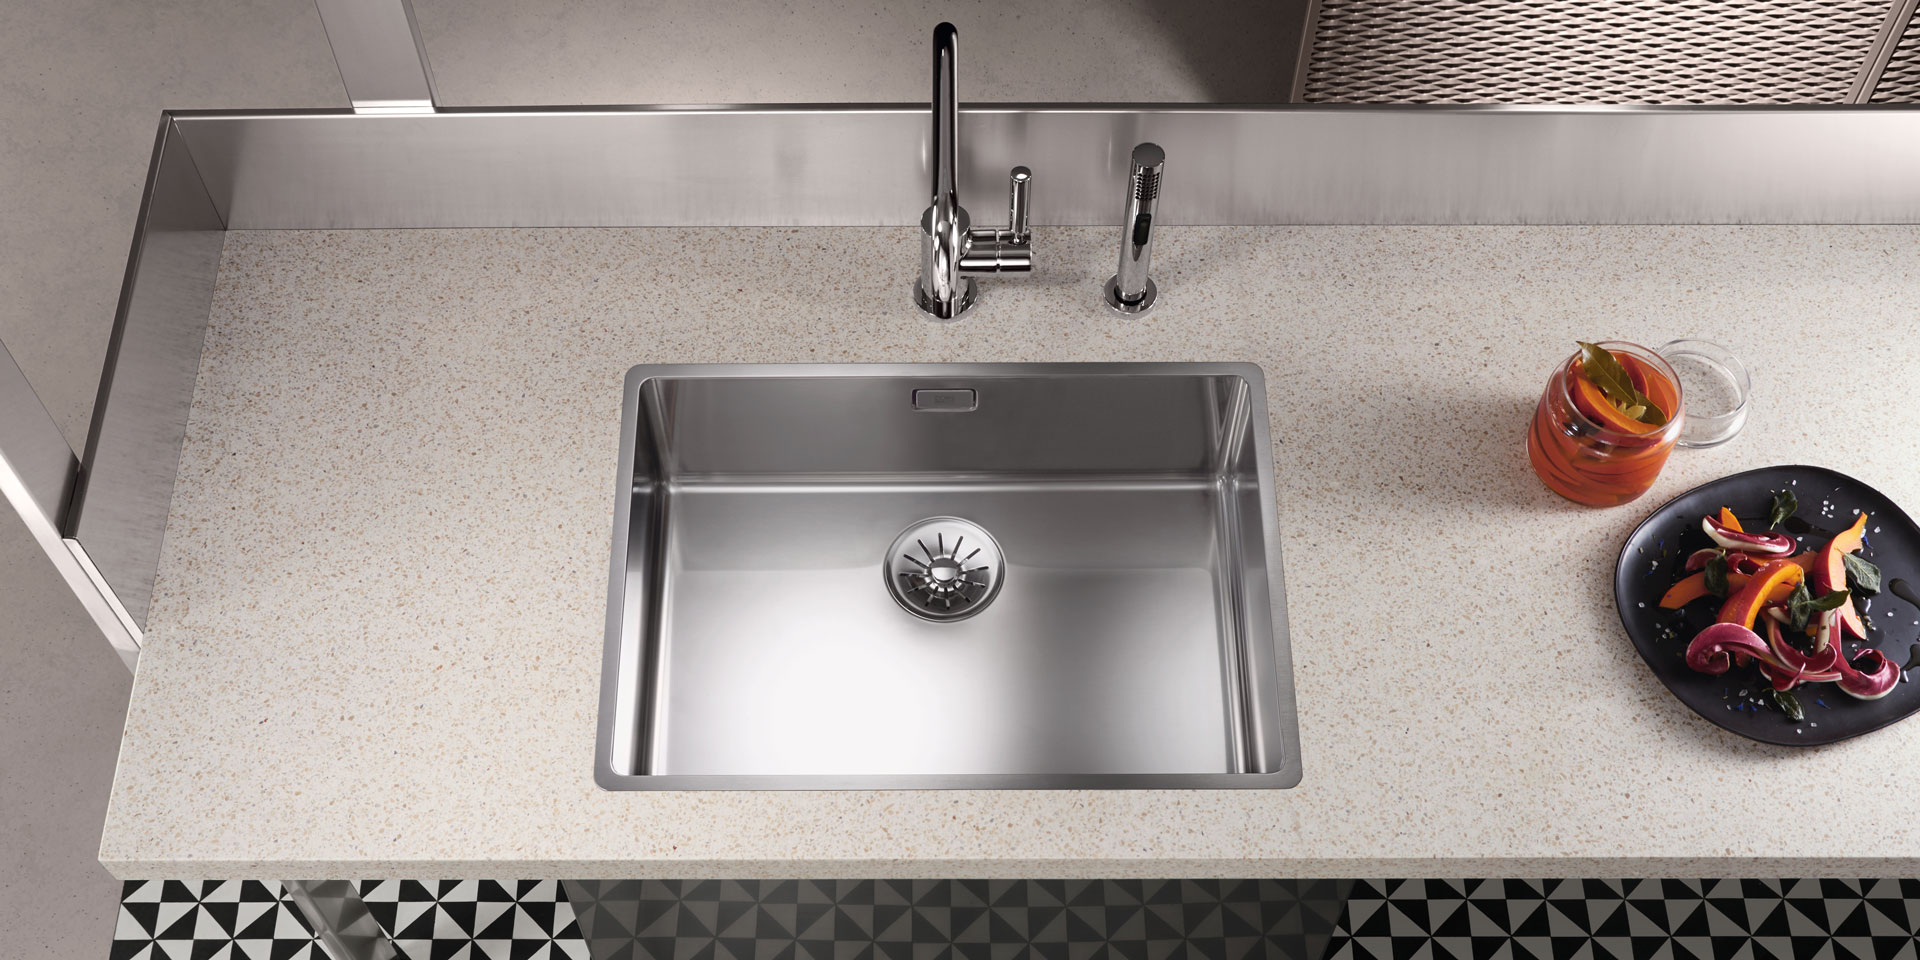 Polished stainless steel kitchen sinks